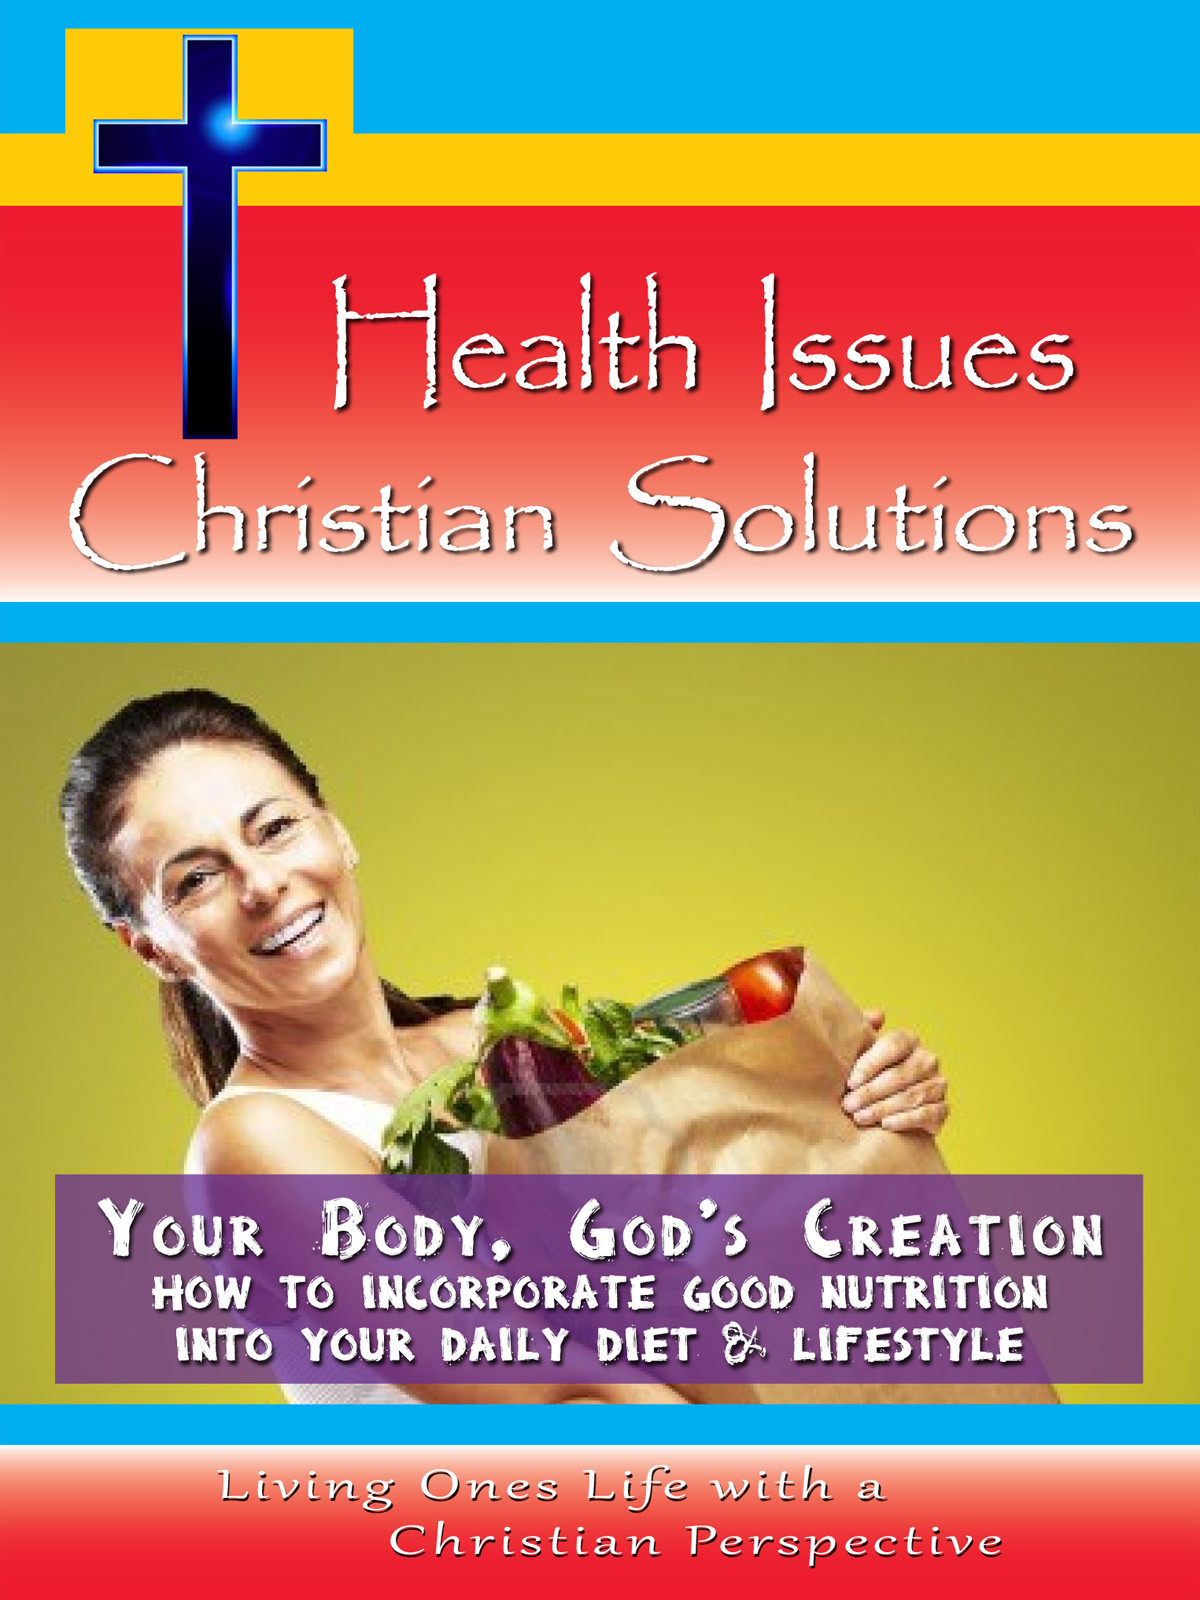 CH10032 - Your Body, God's Creation How to Incorporate Good Nutrition into your Daily Diet & Lifestyle